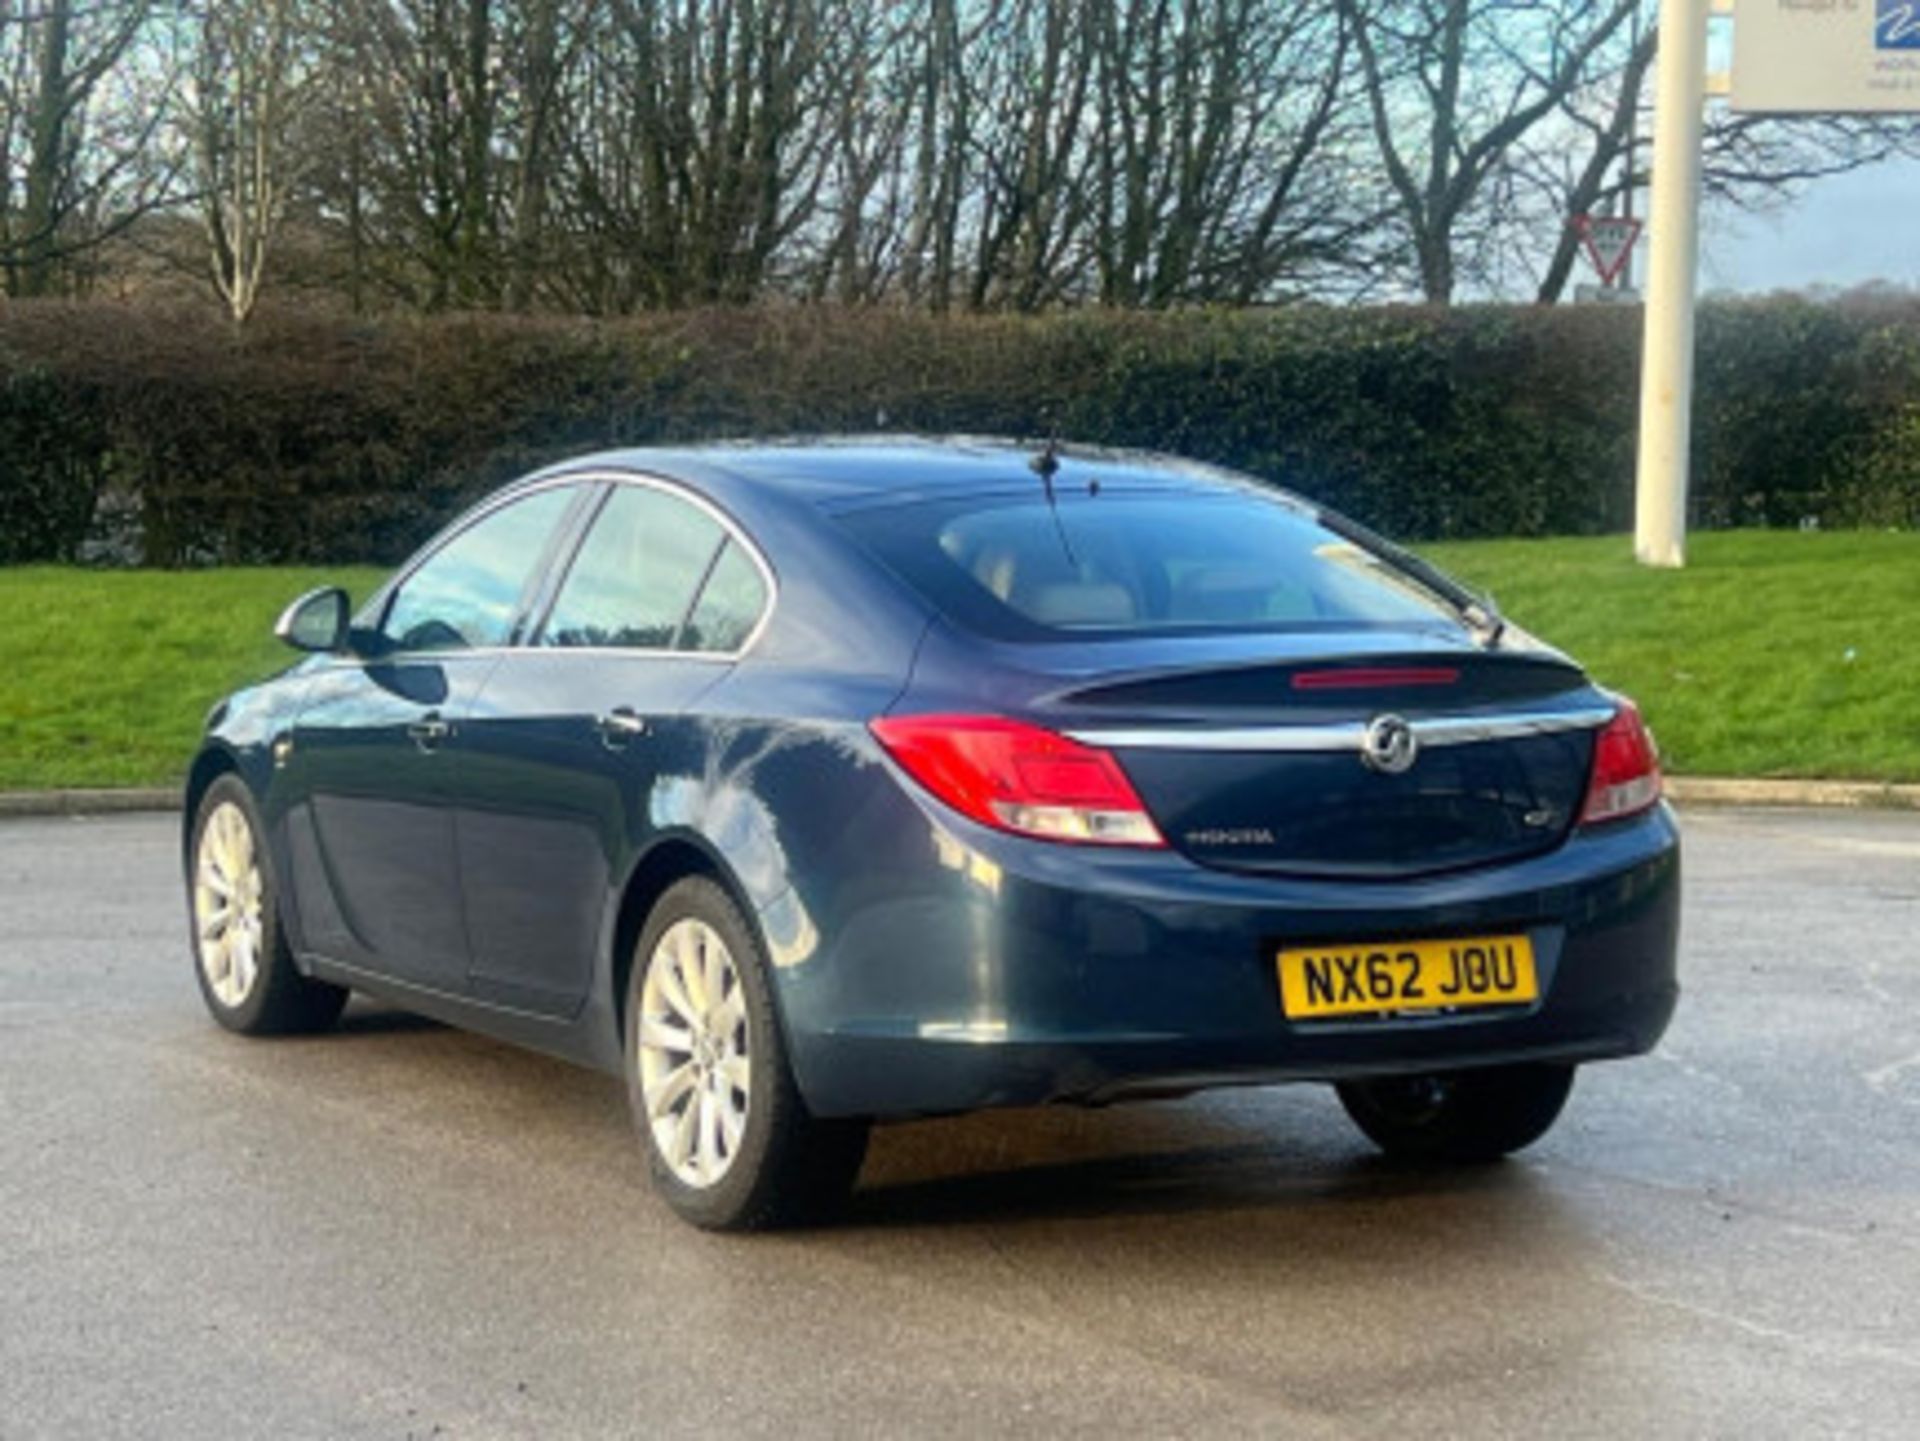 2012 VAUXHALL INSIGNIA 2.0 CDTI ELITE AUTO EURO 5 - DISCOVER EXCELLENCE >>--NO VAT ON HAMMER--<< - Image 49 of 120